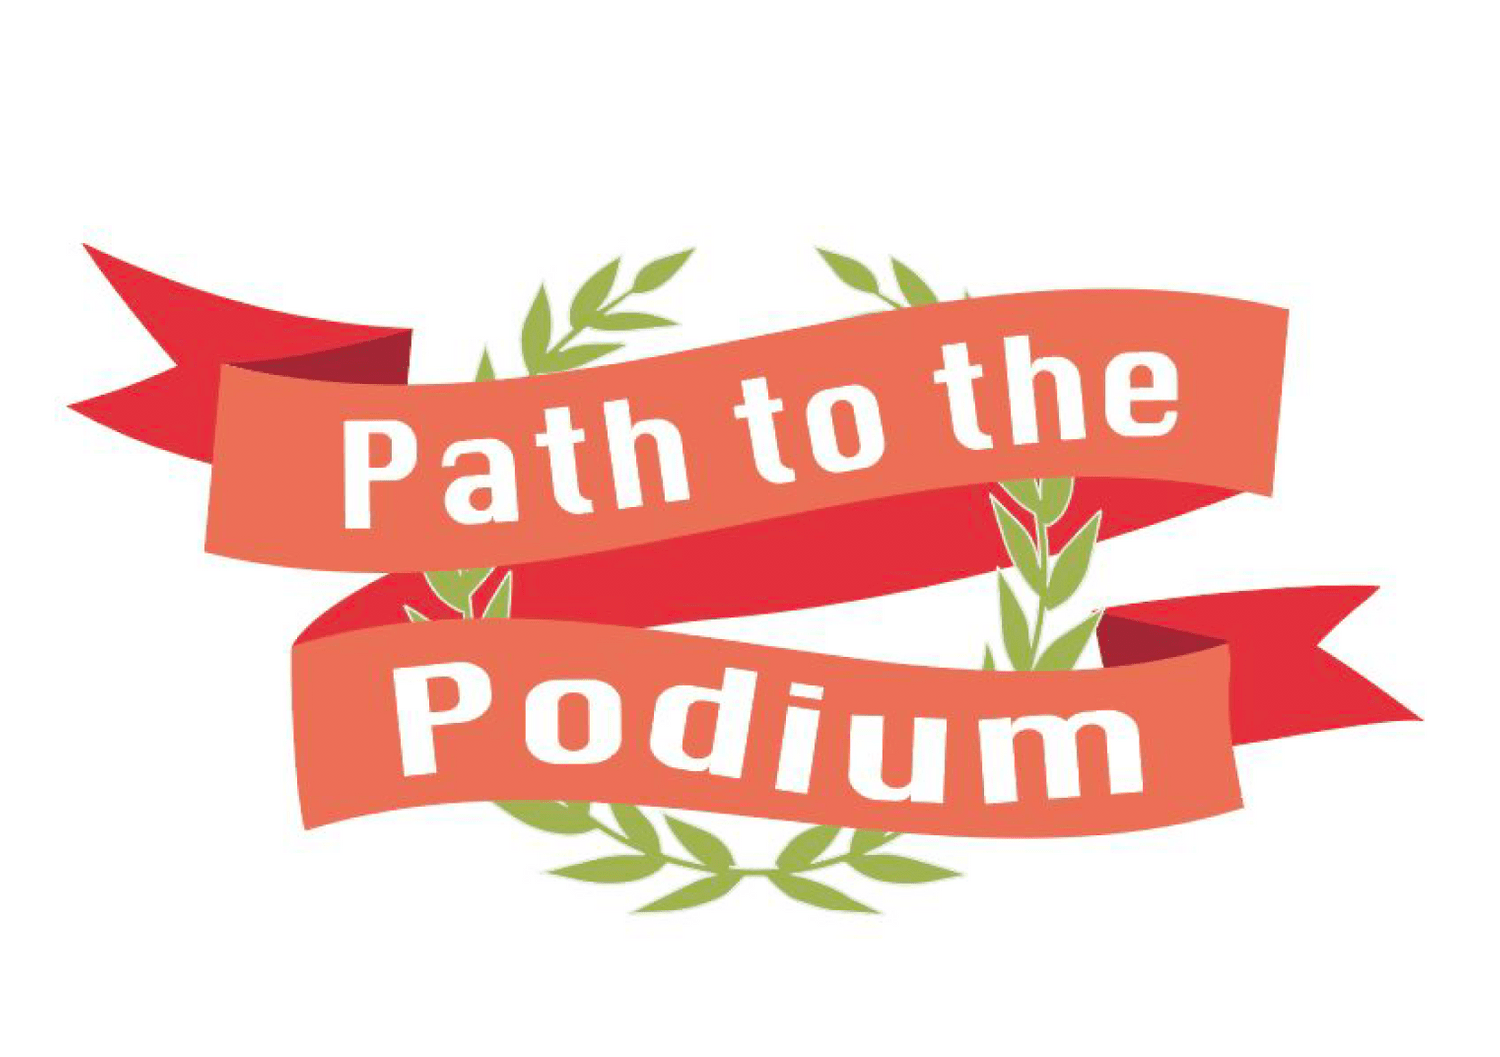 Brand identity for the Path to the Podium board game.